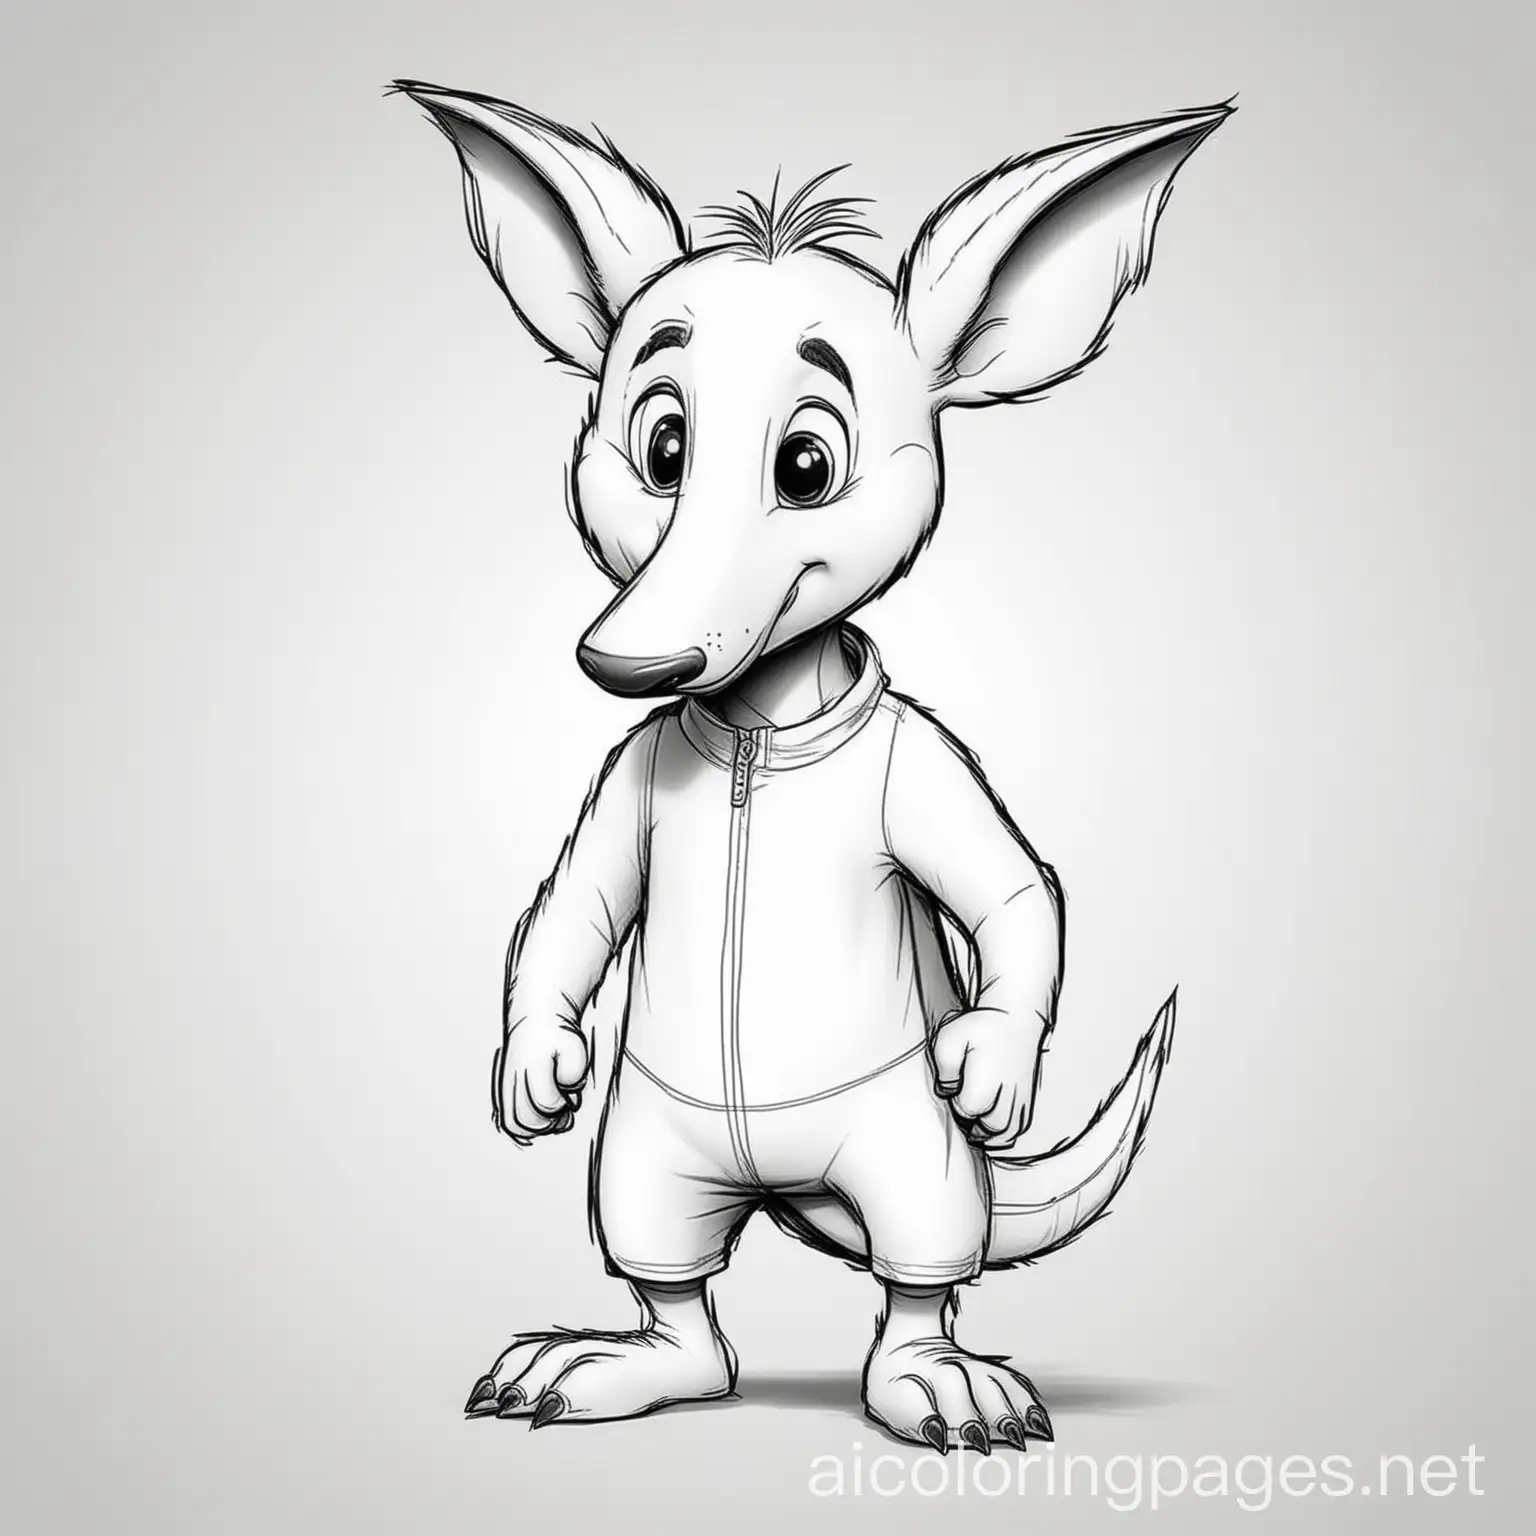 Simple-Aardvark-Coloring-Page-Easy-to-Color-Cartoon-Character-for-Kids